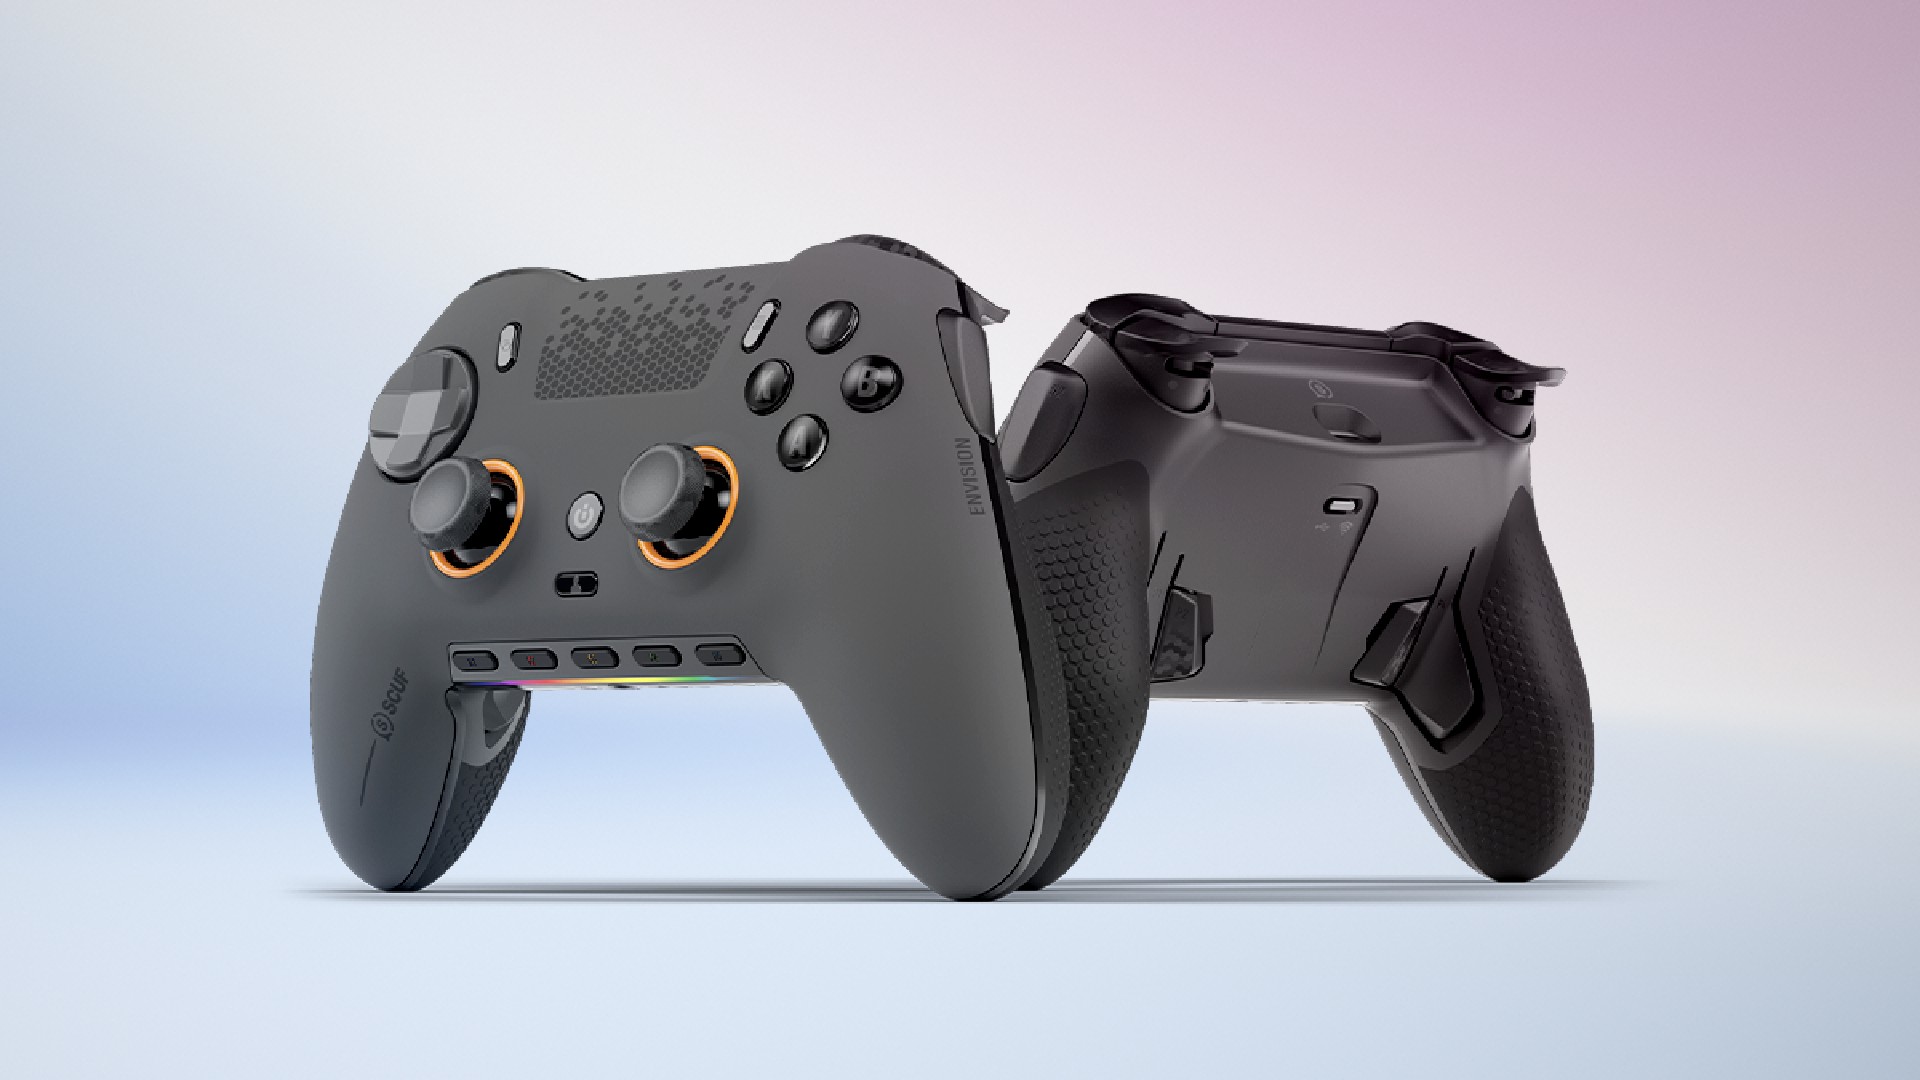 The Scuf Envision controller is coming for your mouse and keyboard